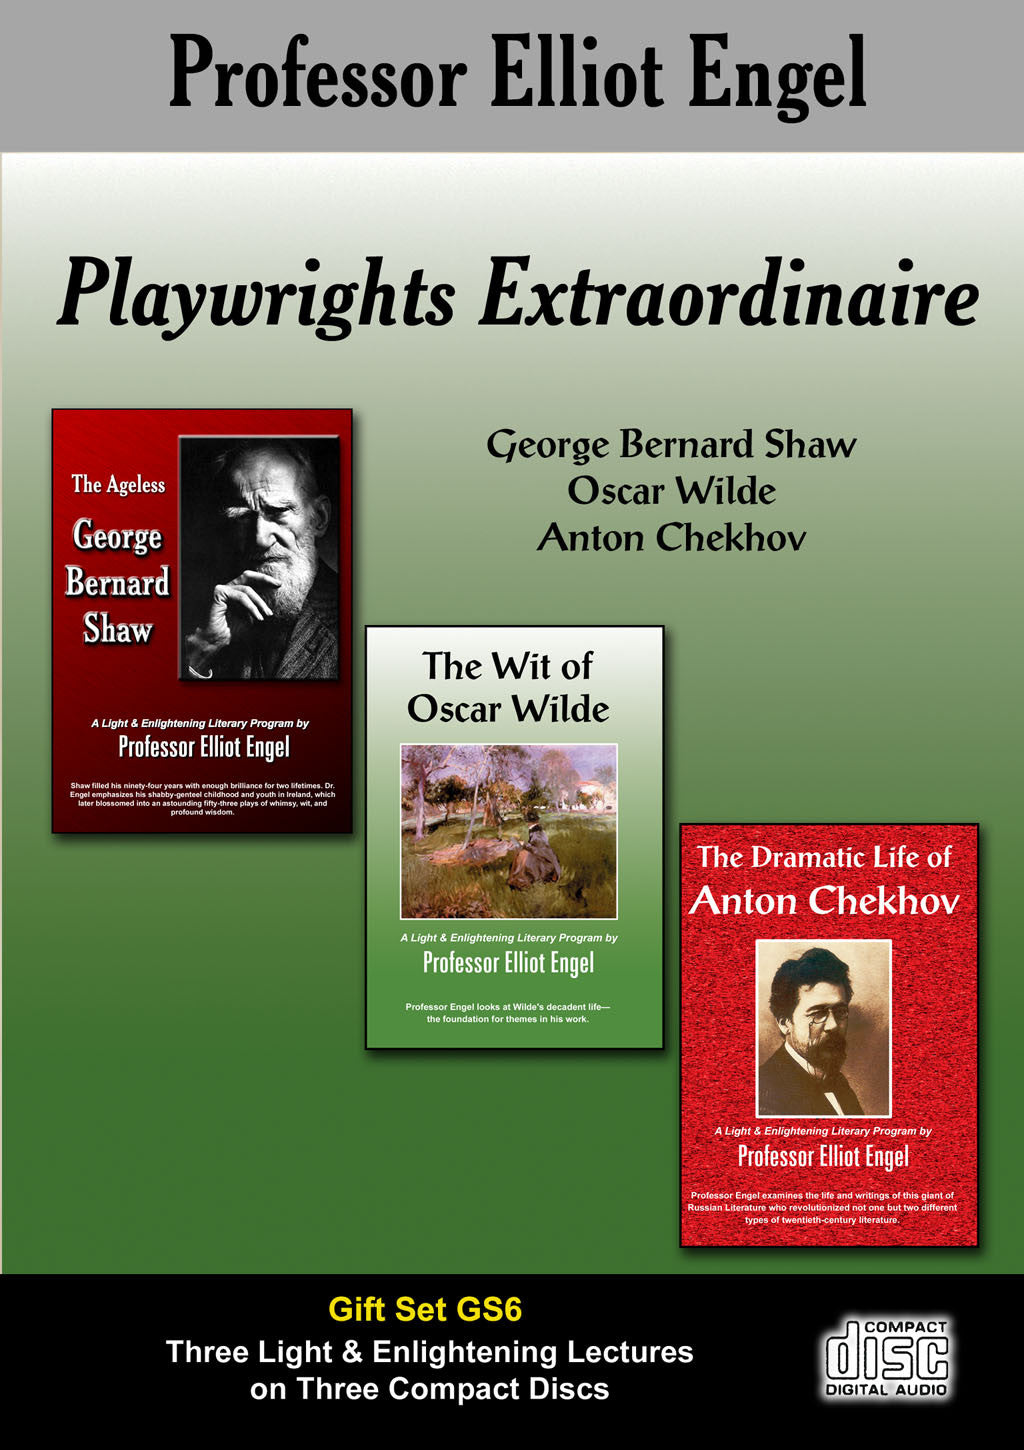 GS06 - Playwrights Extraordinaire (3 CD Gift Set)